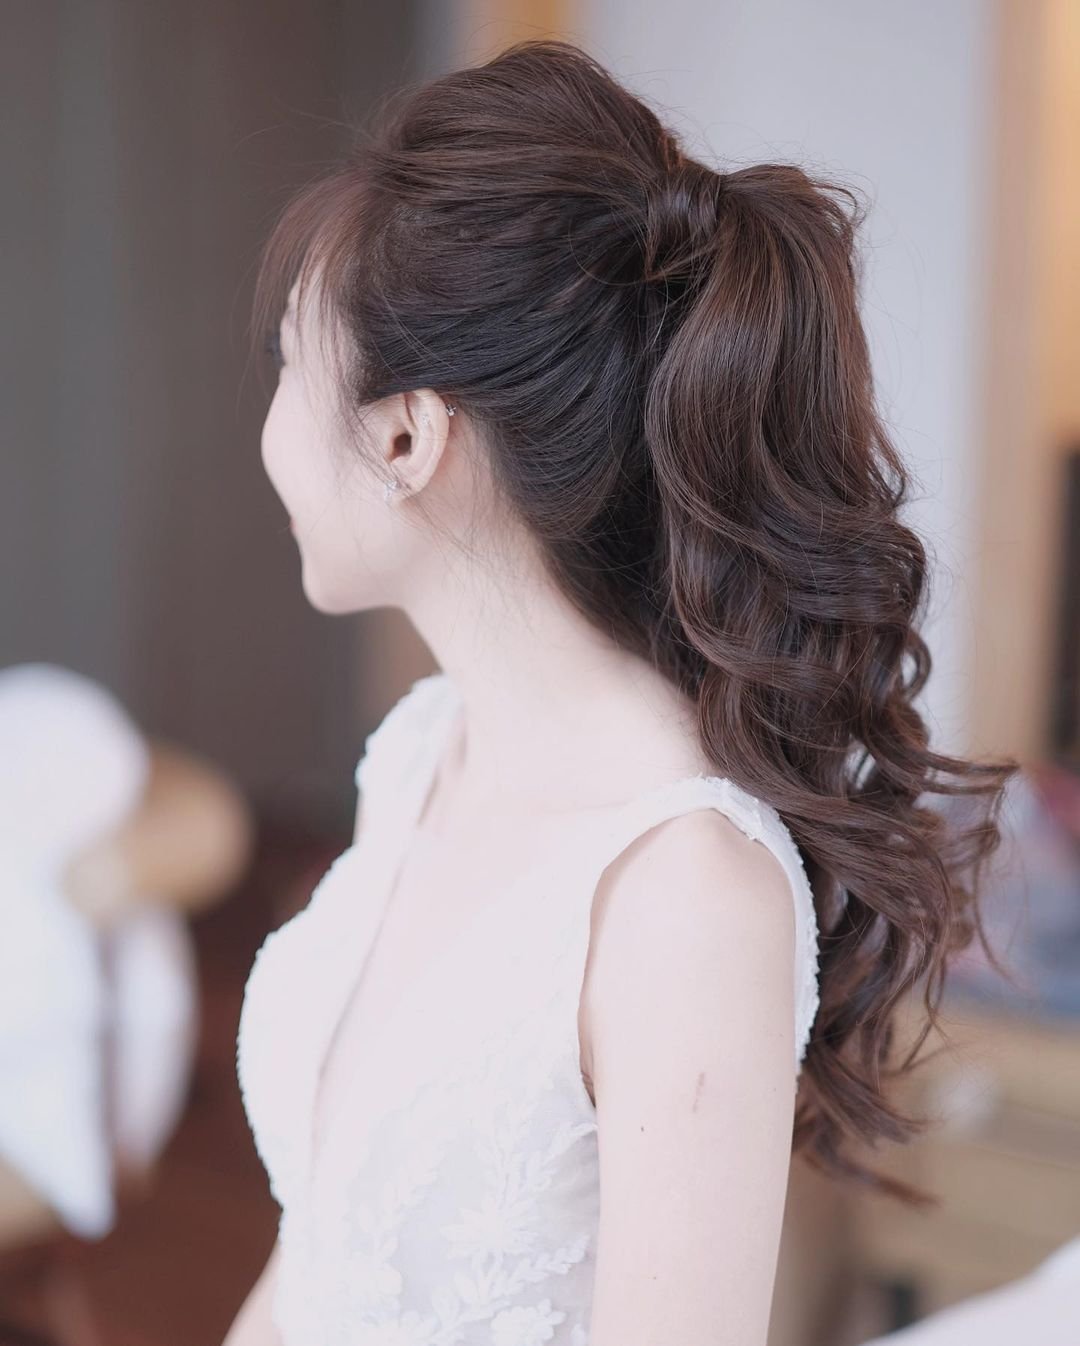 Ponytail is not just a simple ponytail anymore  Shaandaar Events